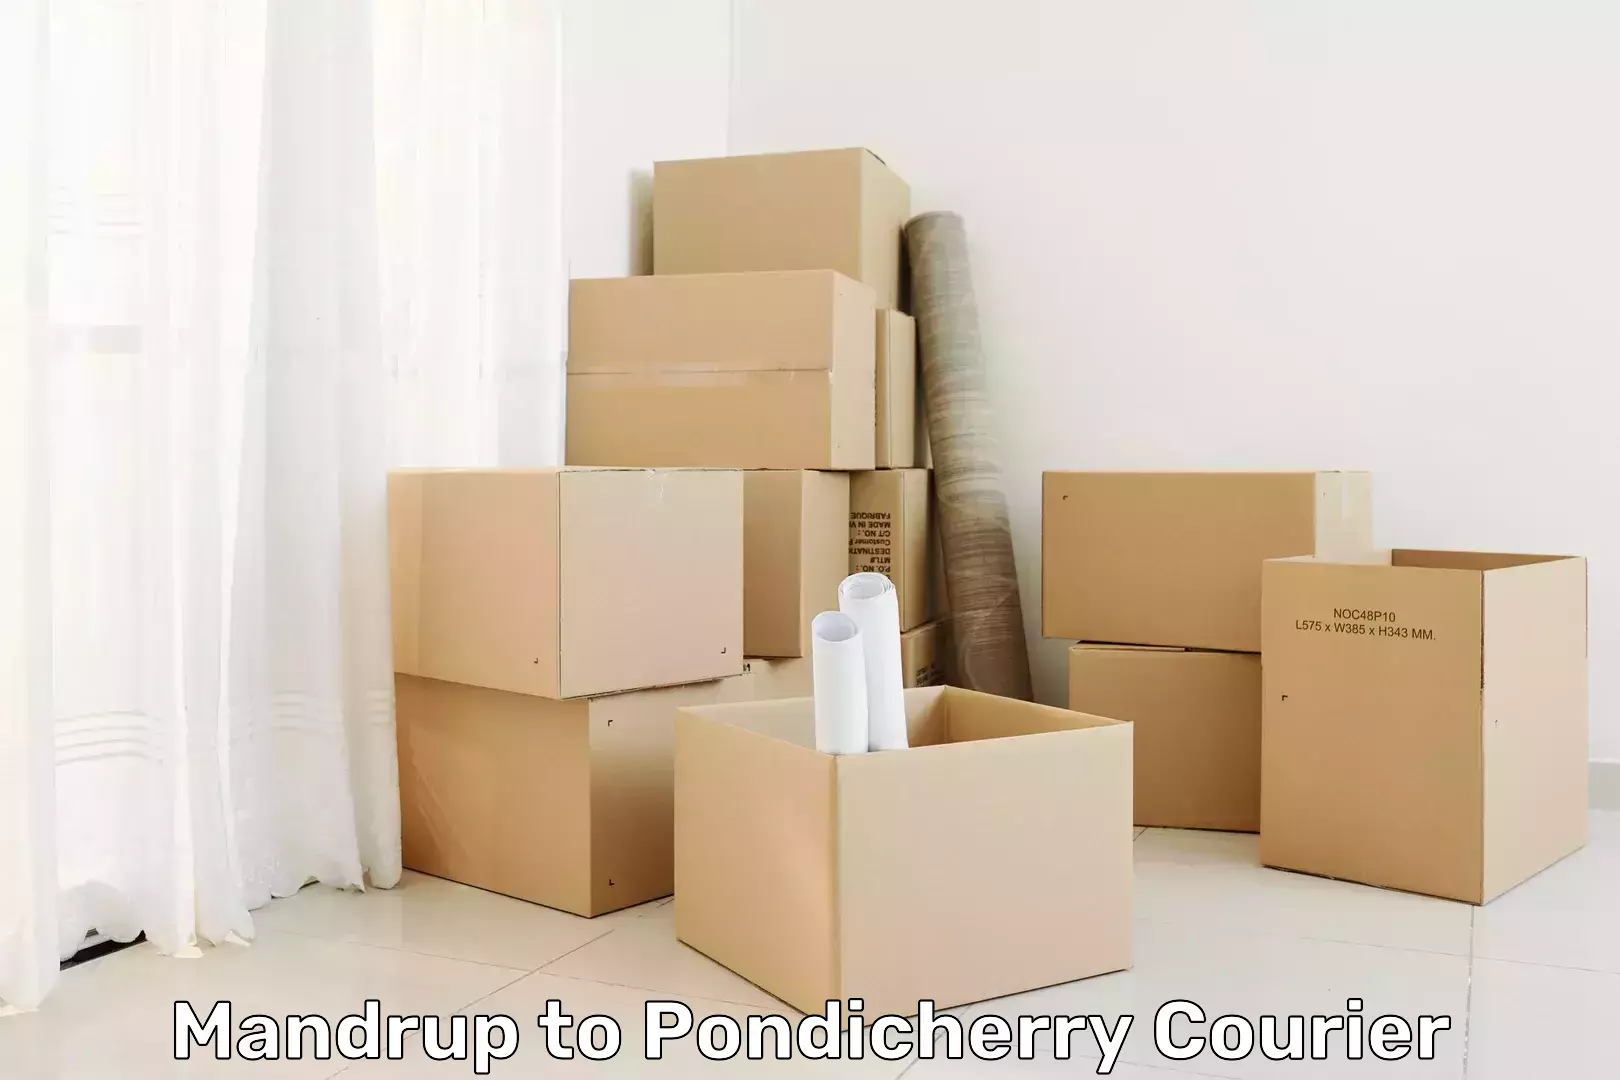 Fast-track shipping solutions Mandrup to Pondicherry University